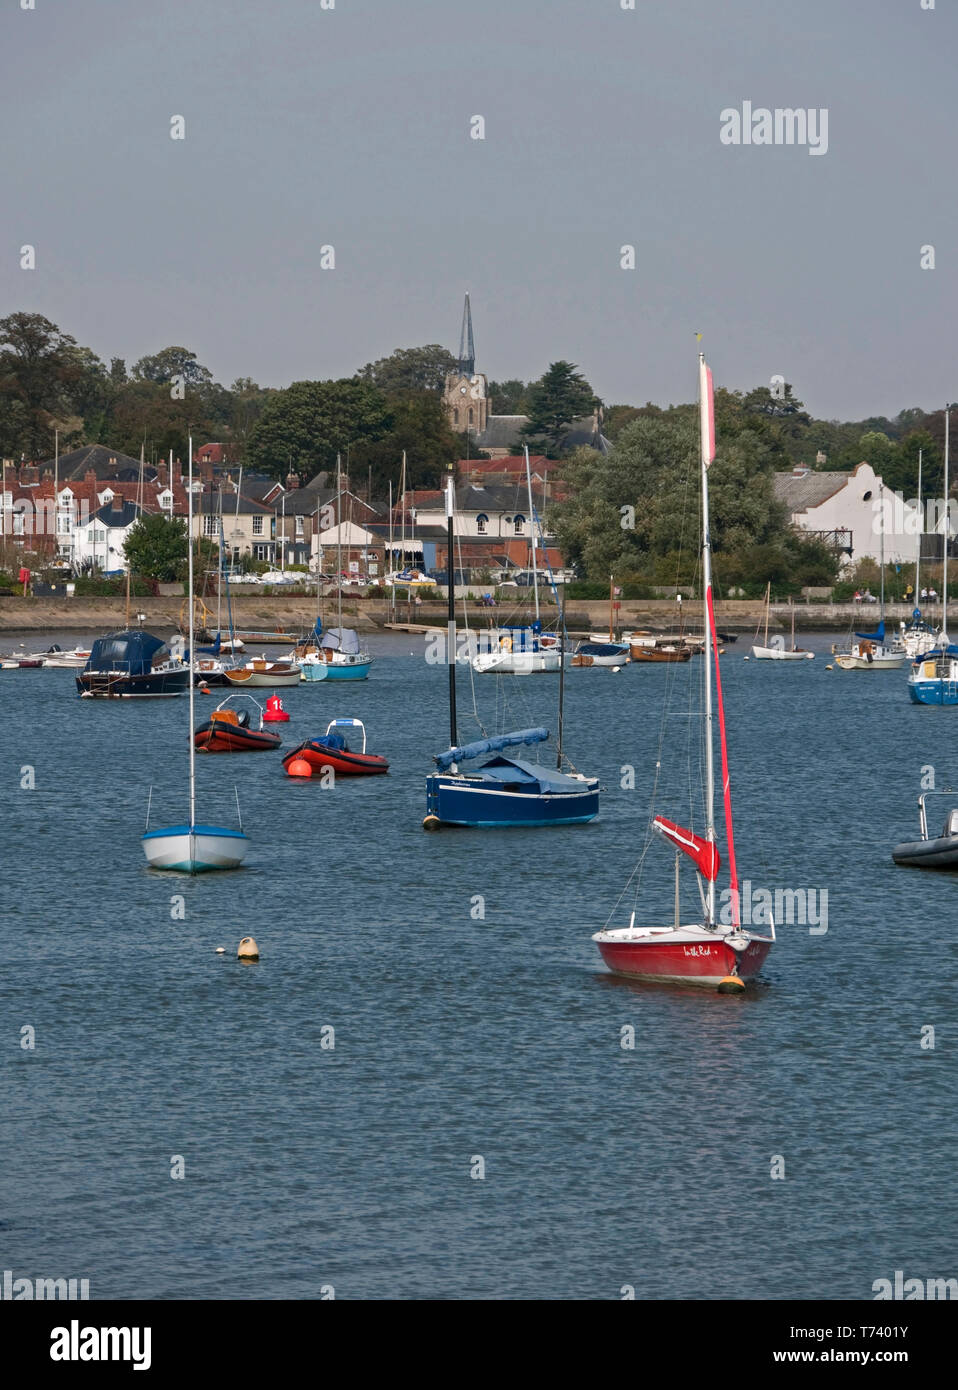 The River Deben at Woodbridge, one of the finest river estuaries in England, with it many sailing boats, Woodbridge, Suffolk, England, UK, Stock Photo